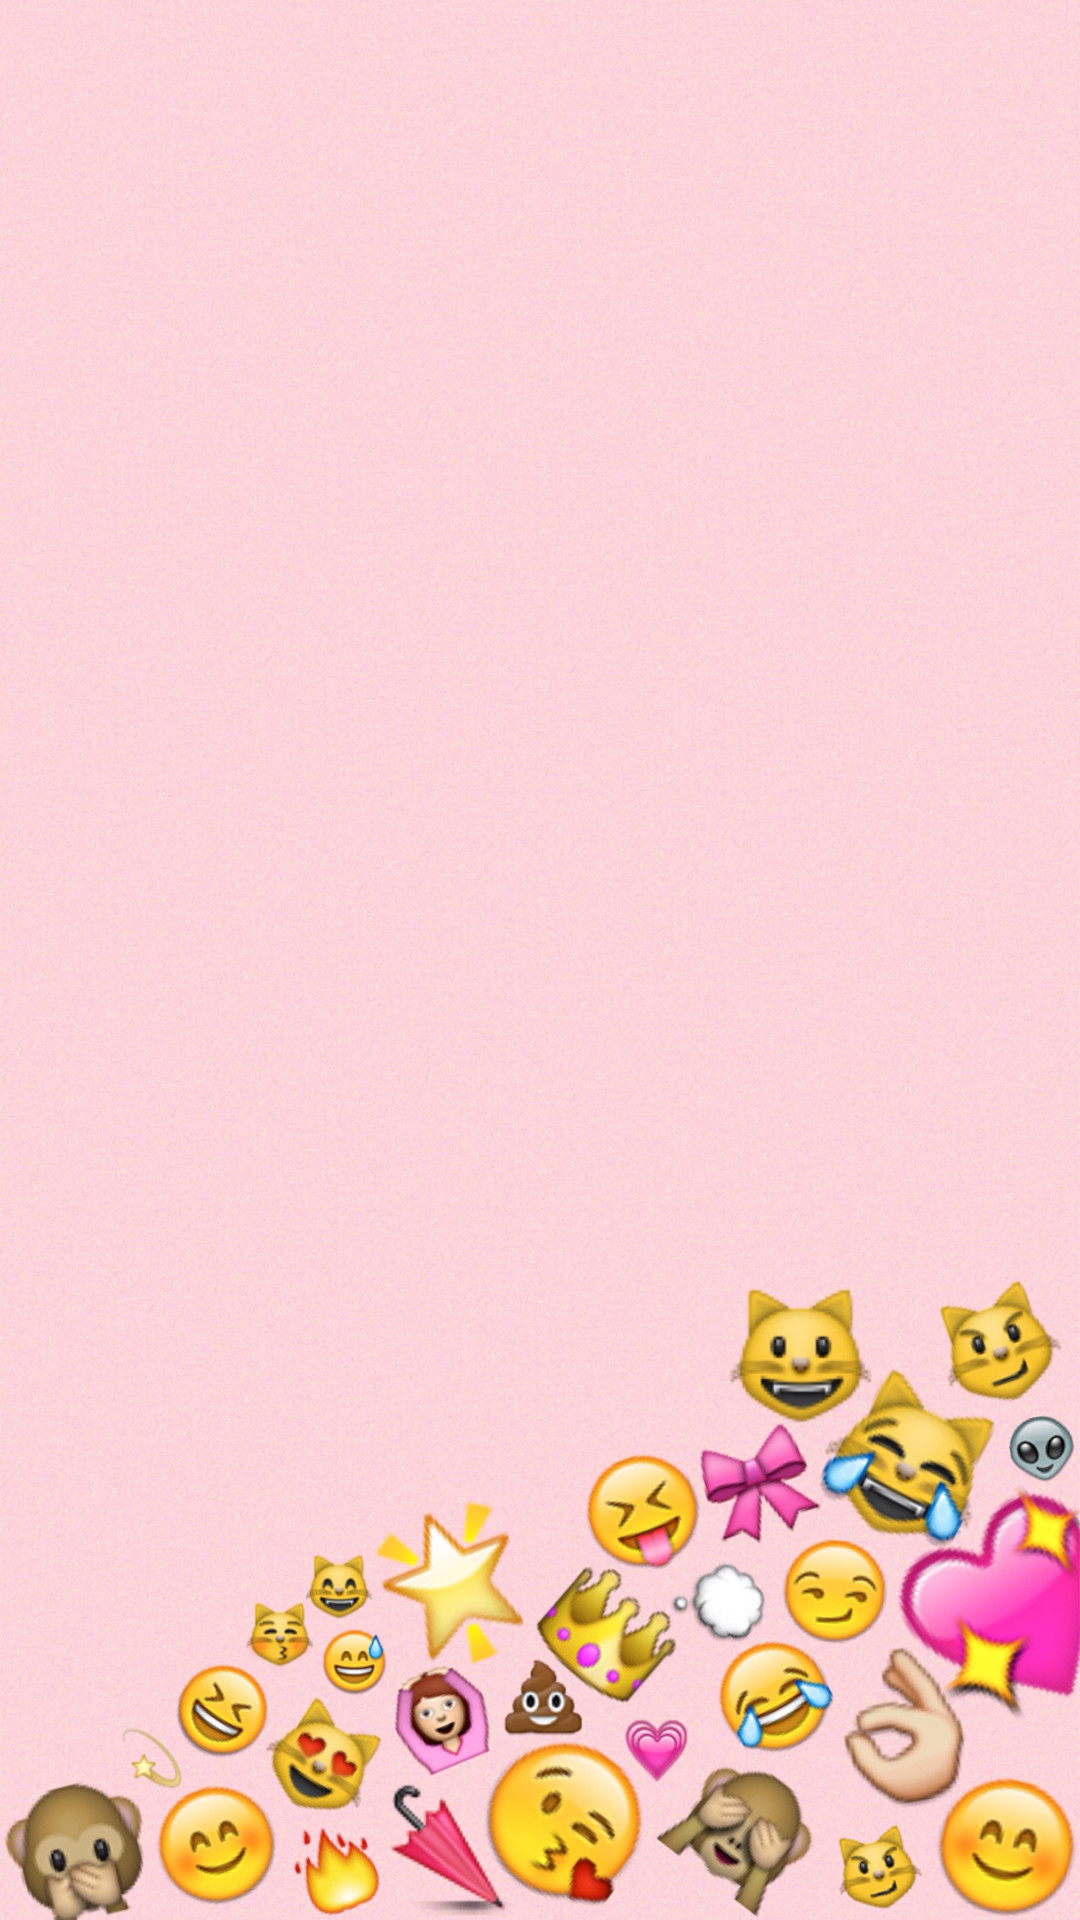 Cute Girly Cool Wallpapers